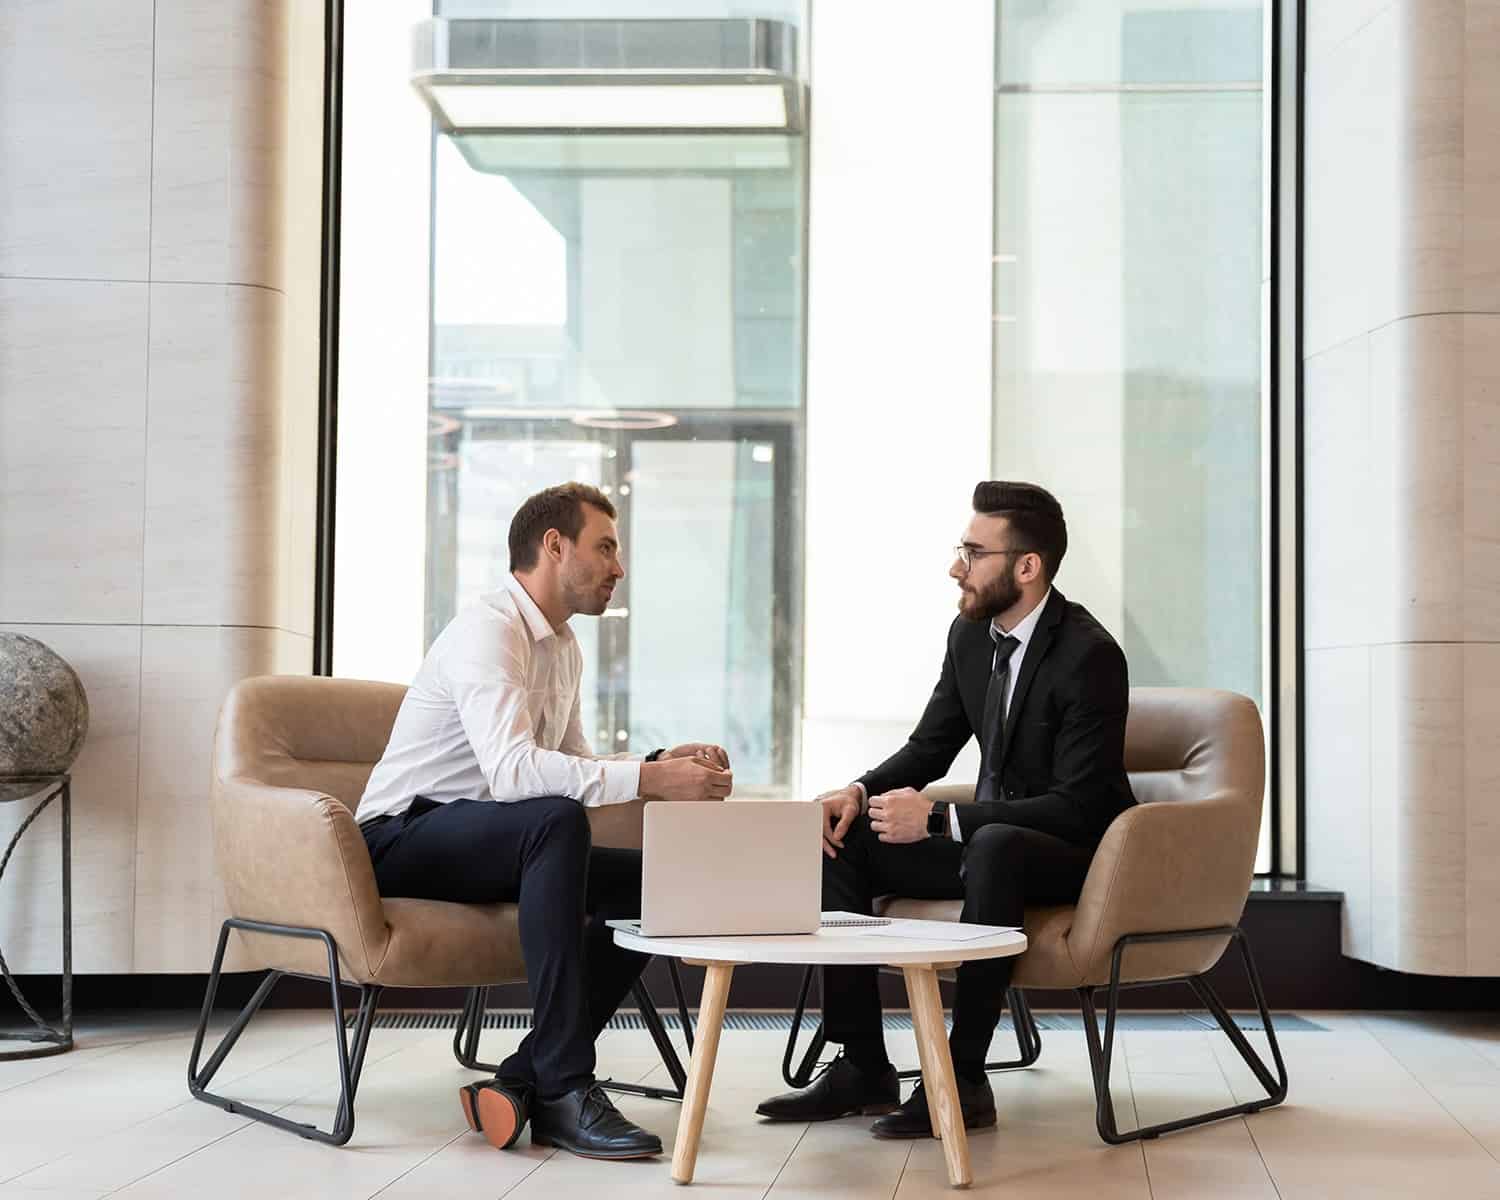 6 Tips for a Great Investor Interview (From Some of the World’s Leading Venture Capitalists)